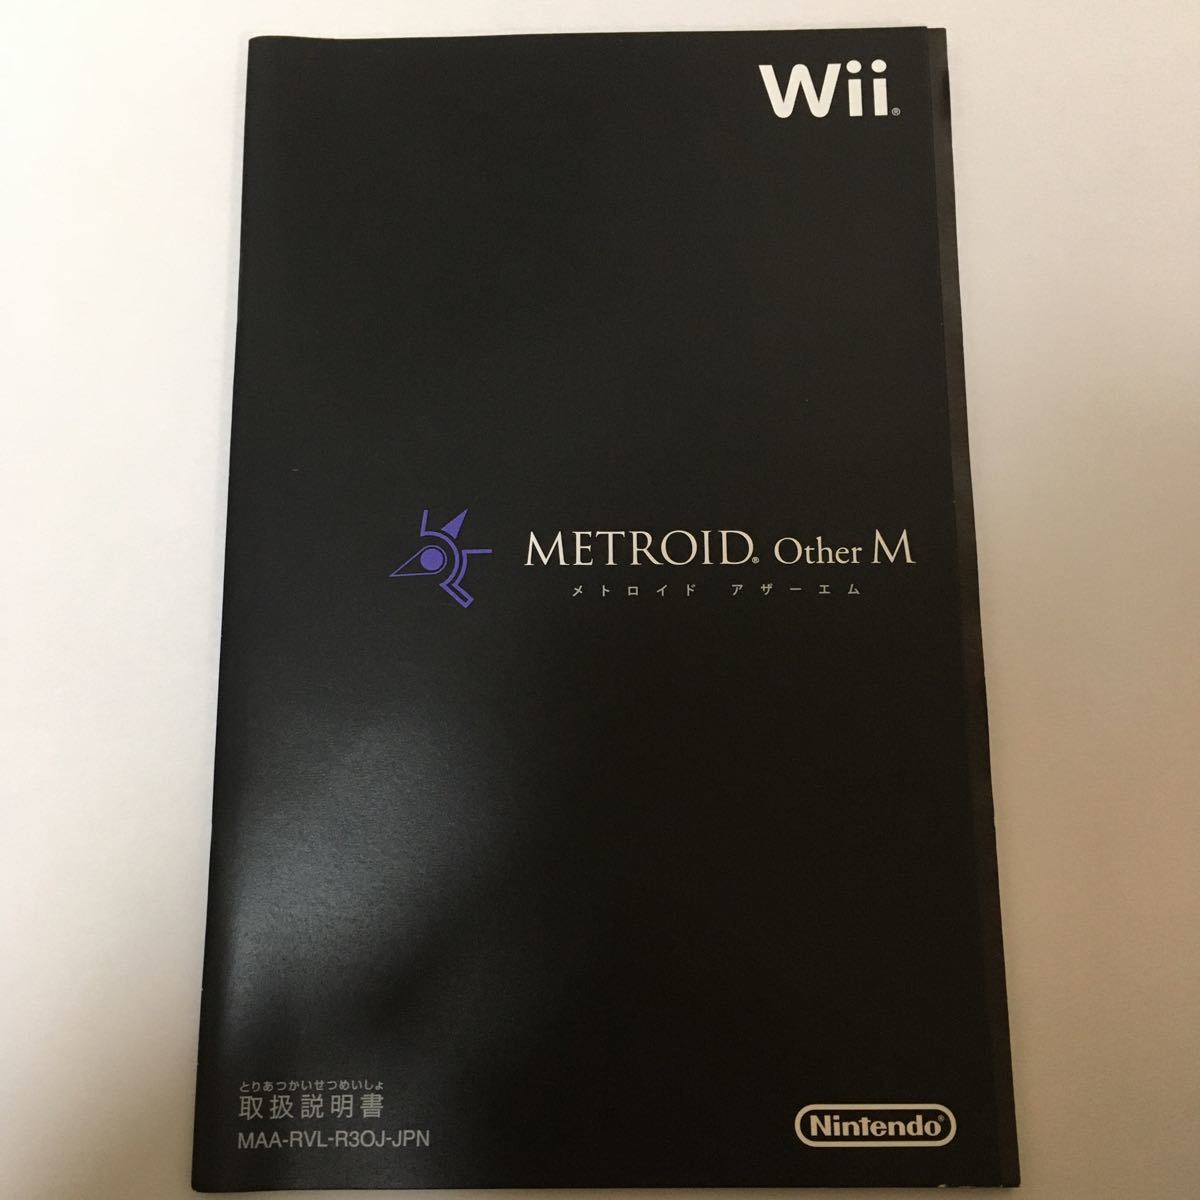 Wii ソフト　メトロイド　アザーエム　動作確認済み　other M  レトロ　ゲーム　サムス